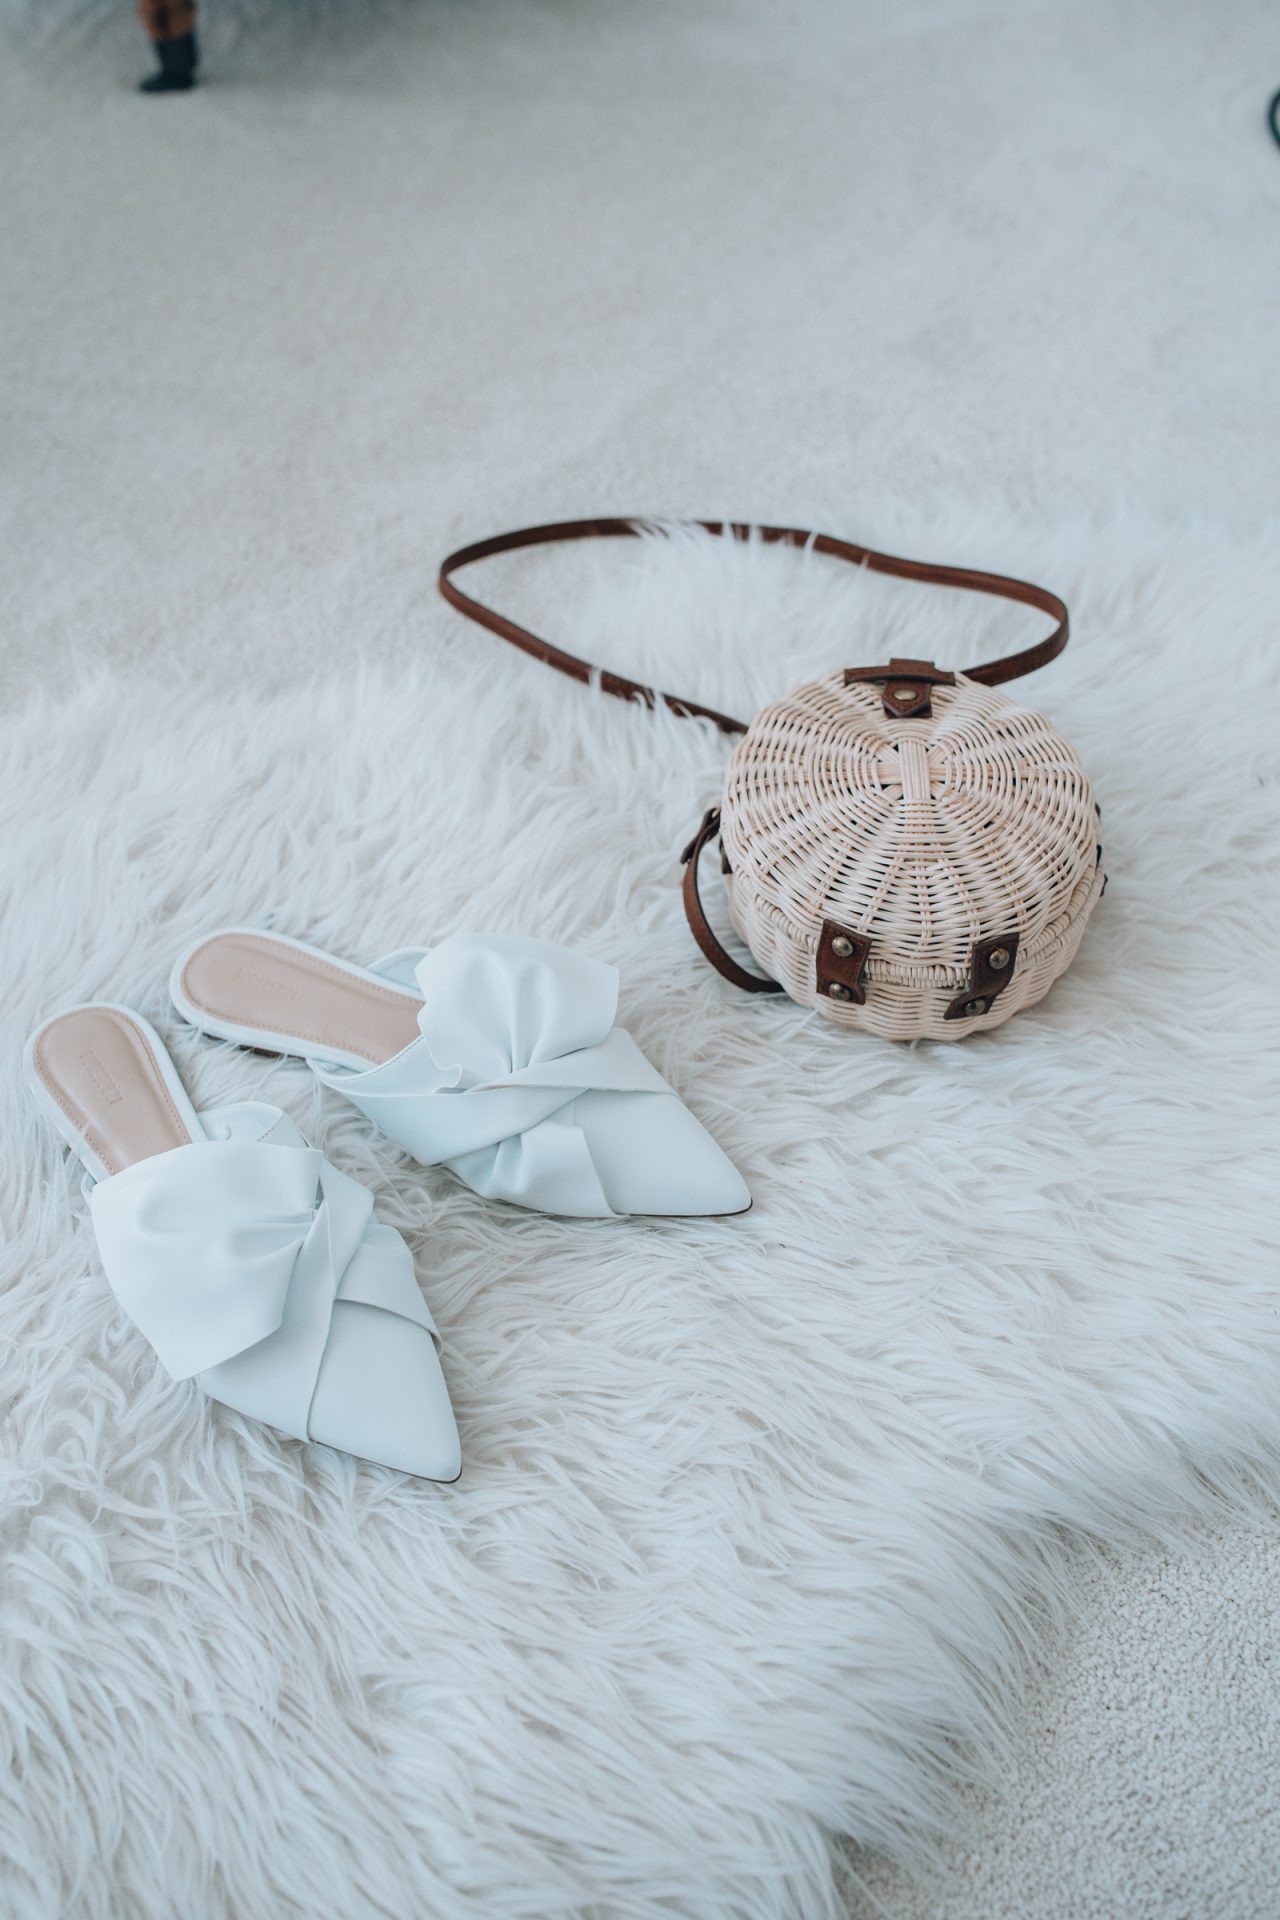 Chicago fashion blogger Happily Inspired is sharing the best spring and summer shoes at every budget! Espadrilles, sandals, sneakers and more.